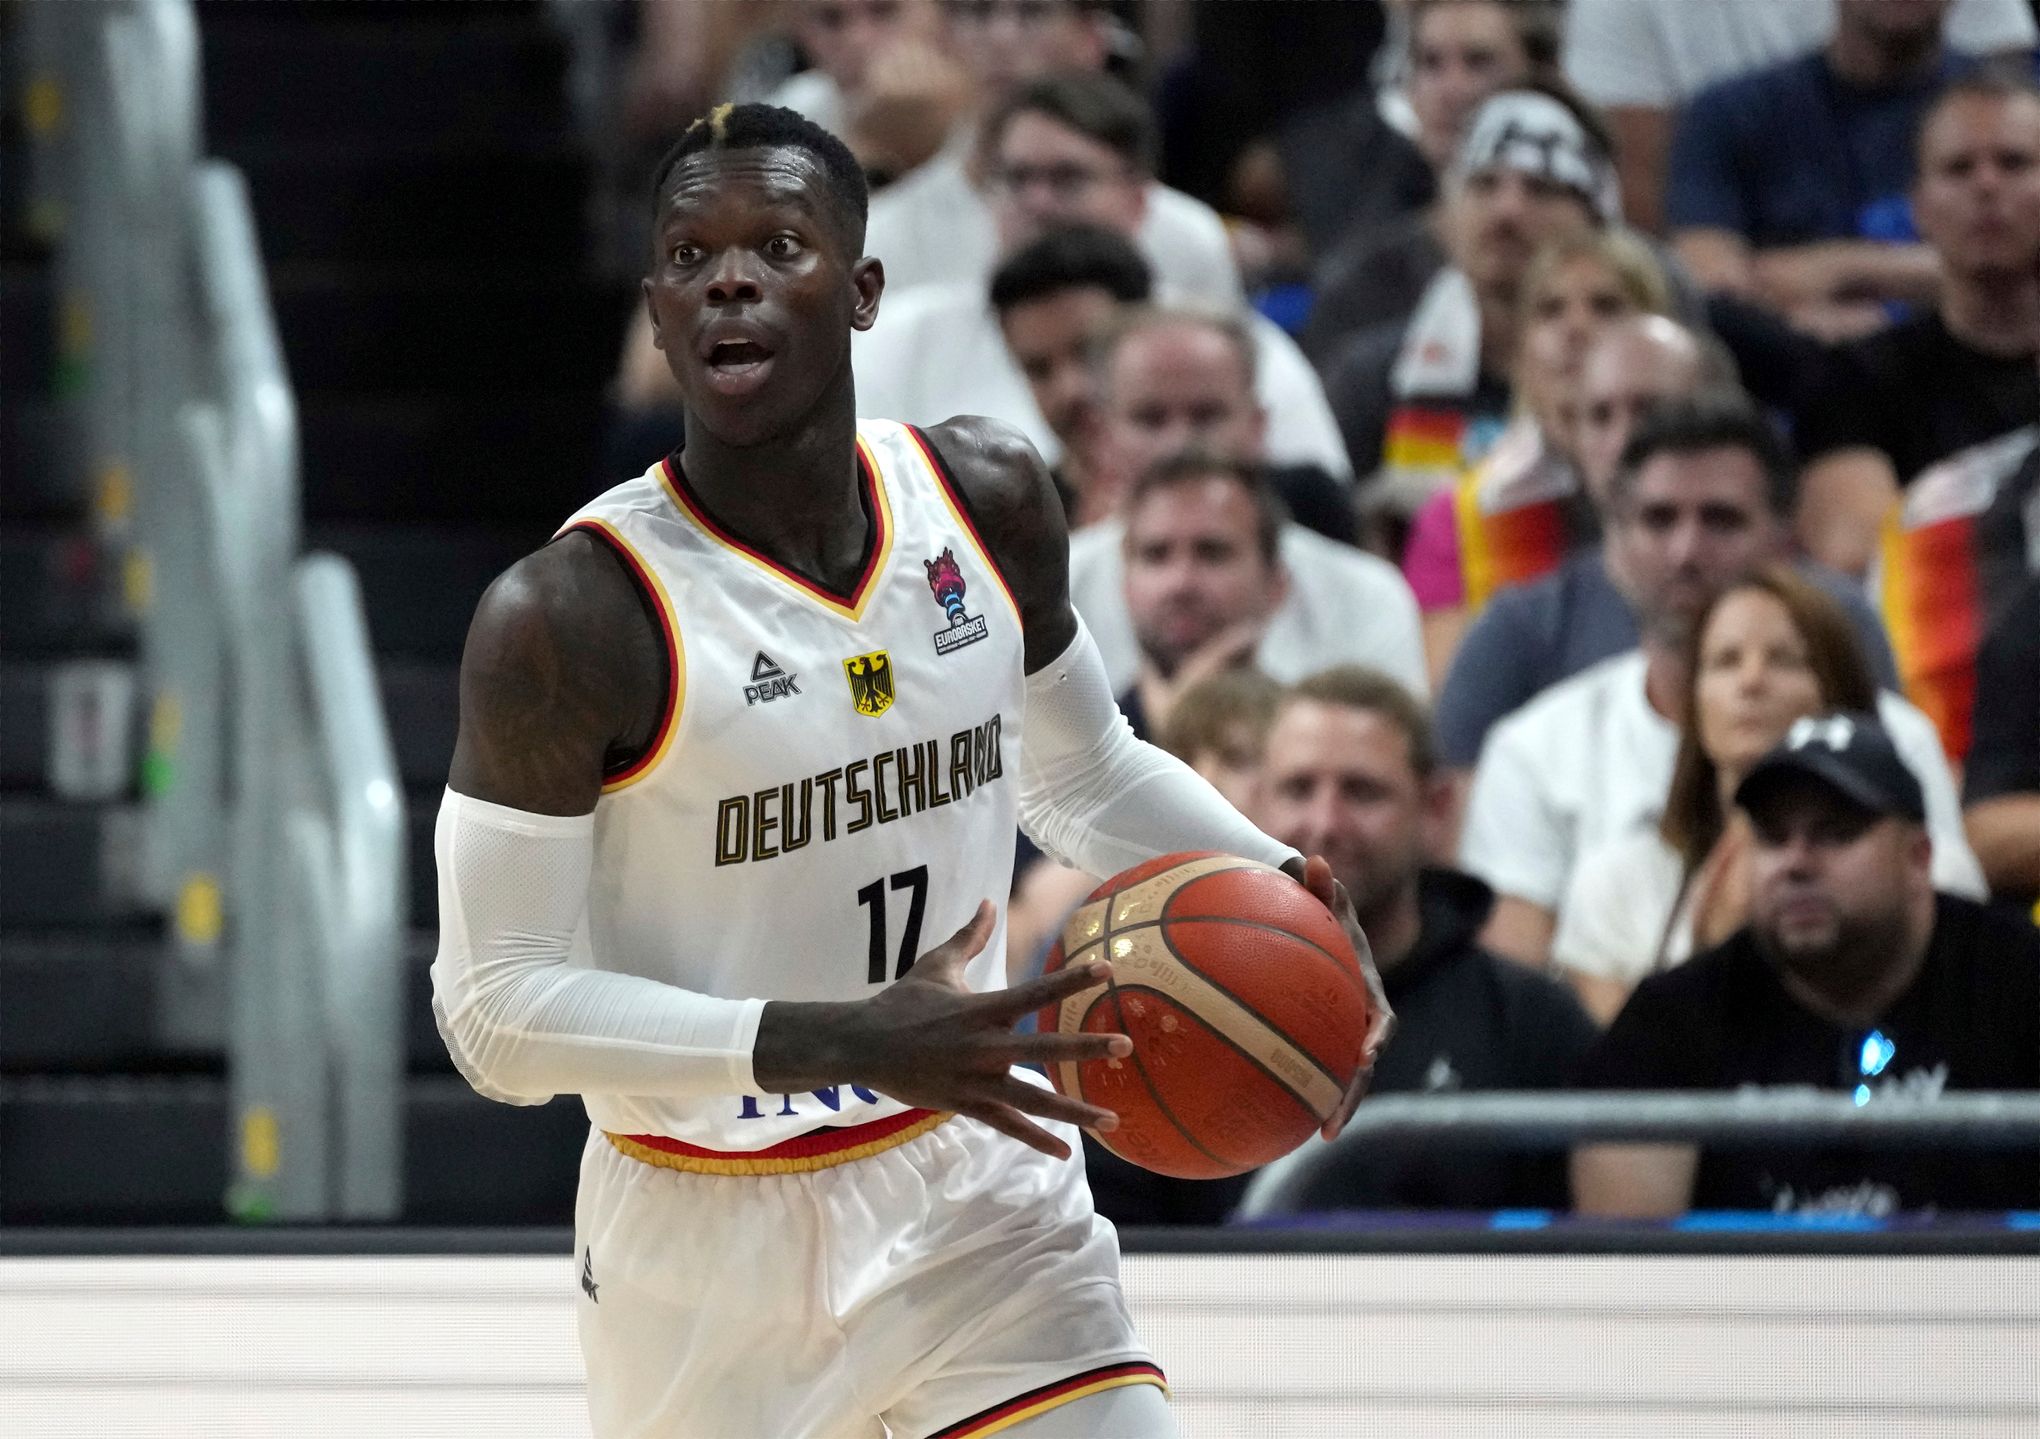 LeBron James is happy Dennis Schroder is returning to Lakers